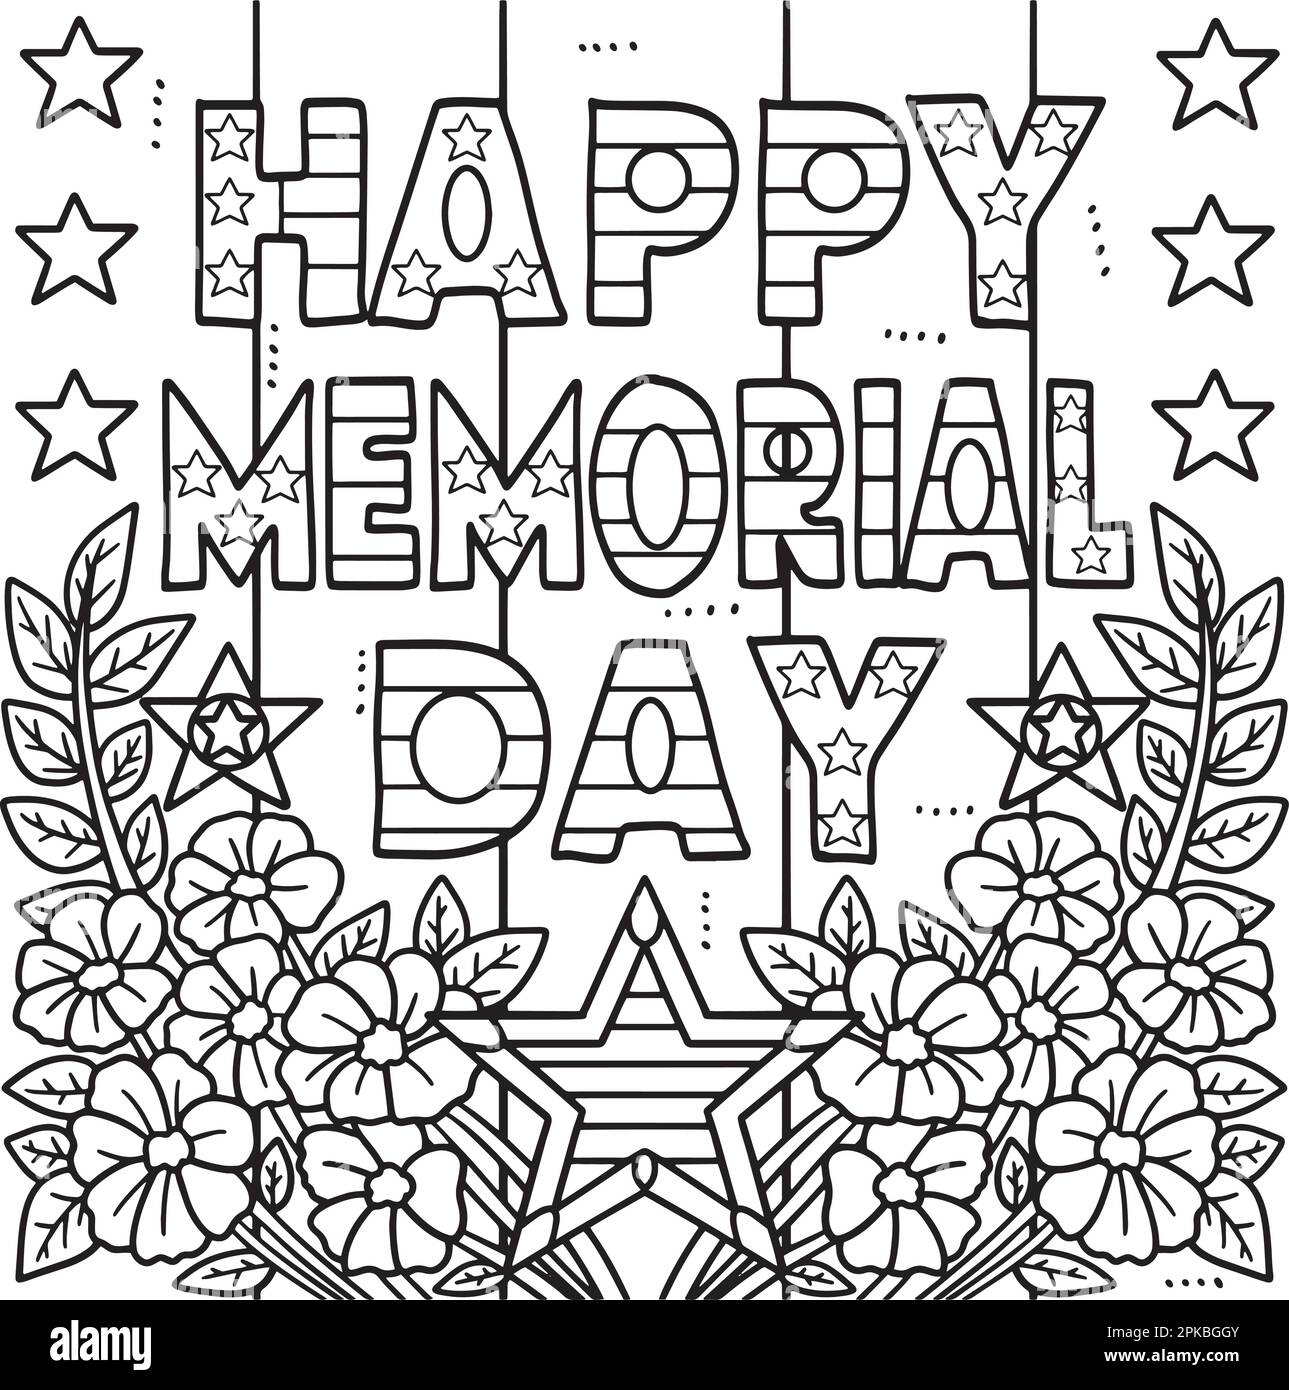 Happy memorial day coloring page for kids stock vector image art